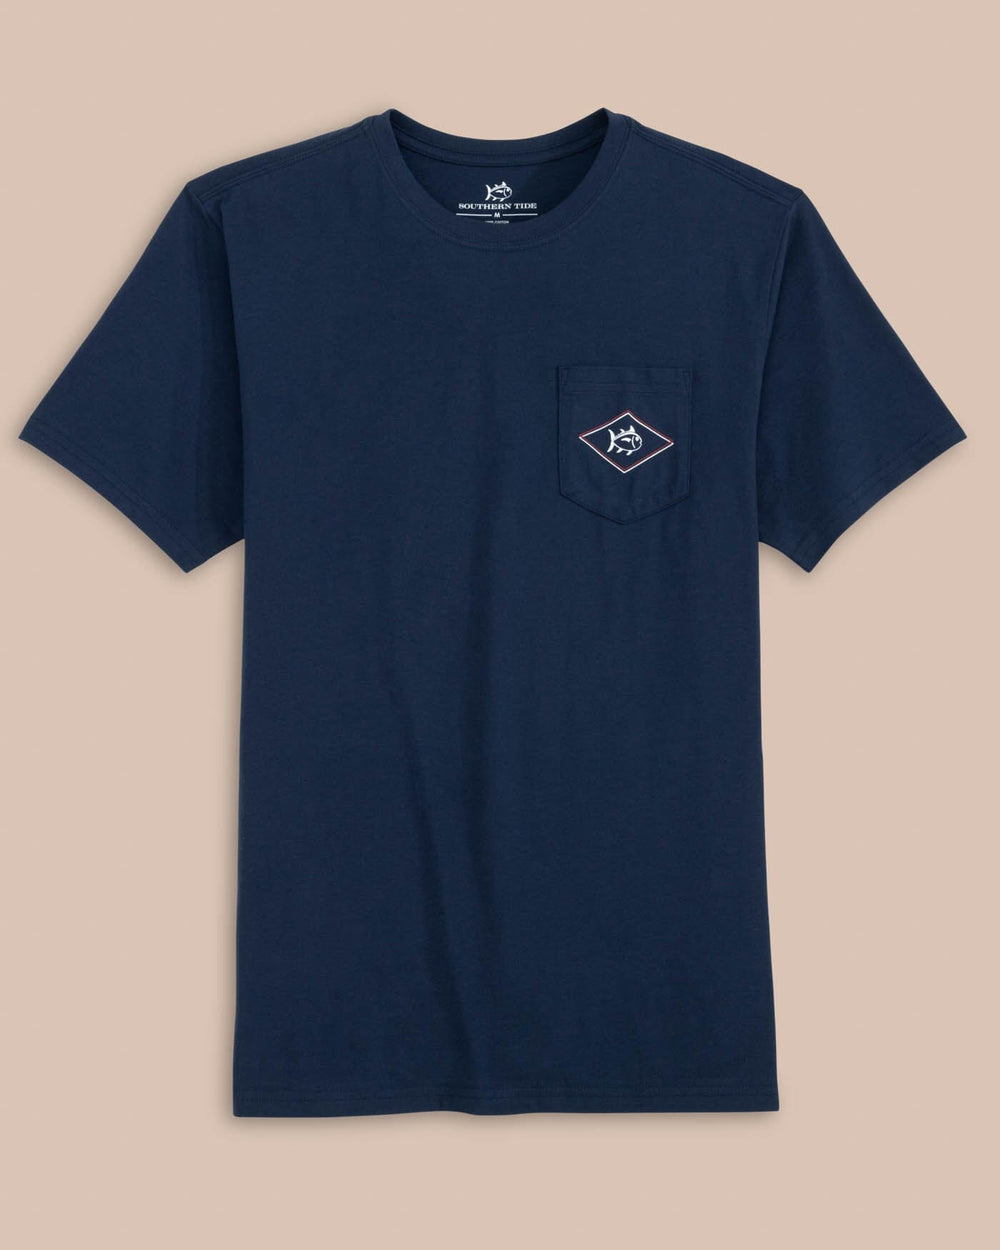 The front view of the Southern Tide Rod and Reel Flag Short Sleeve T-Shirt by Southern Tide - Navy